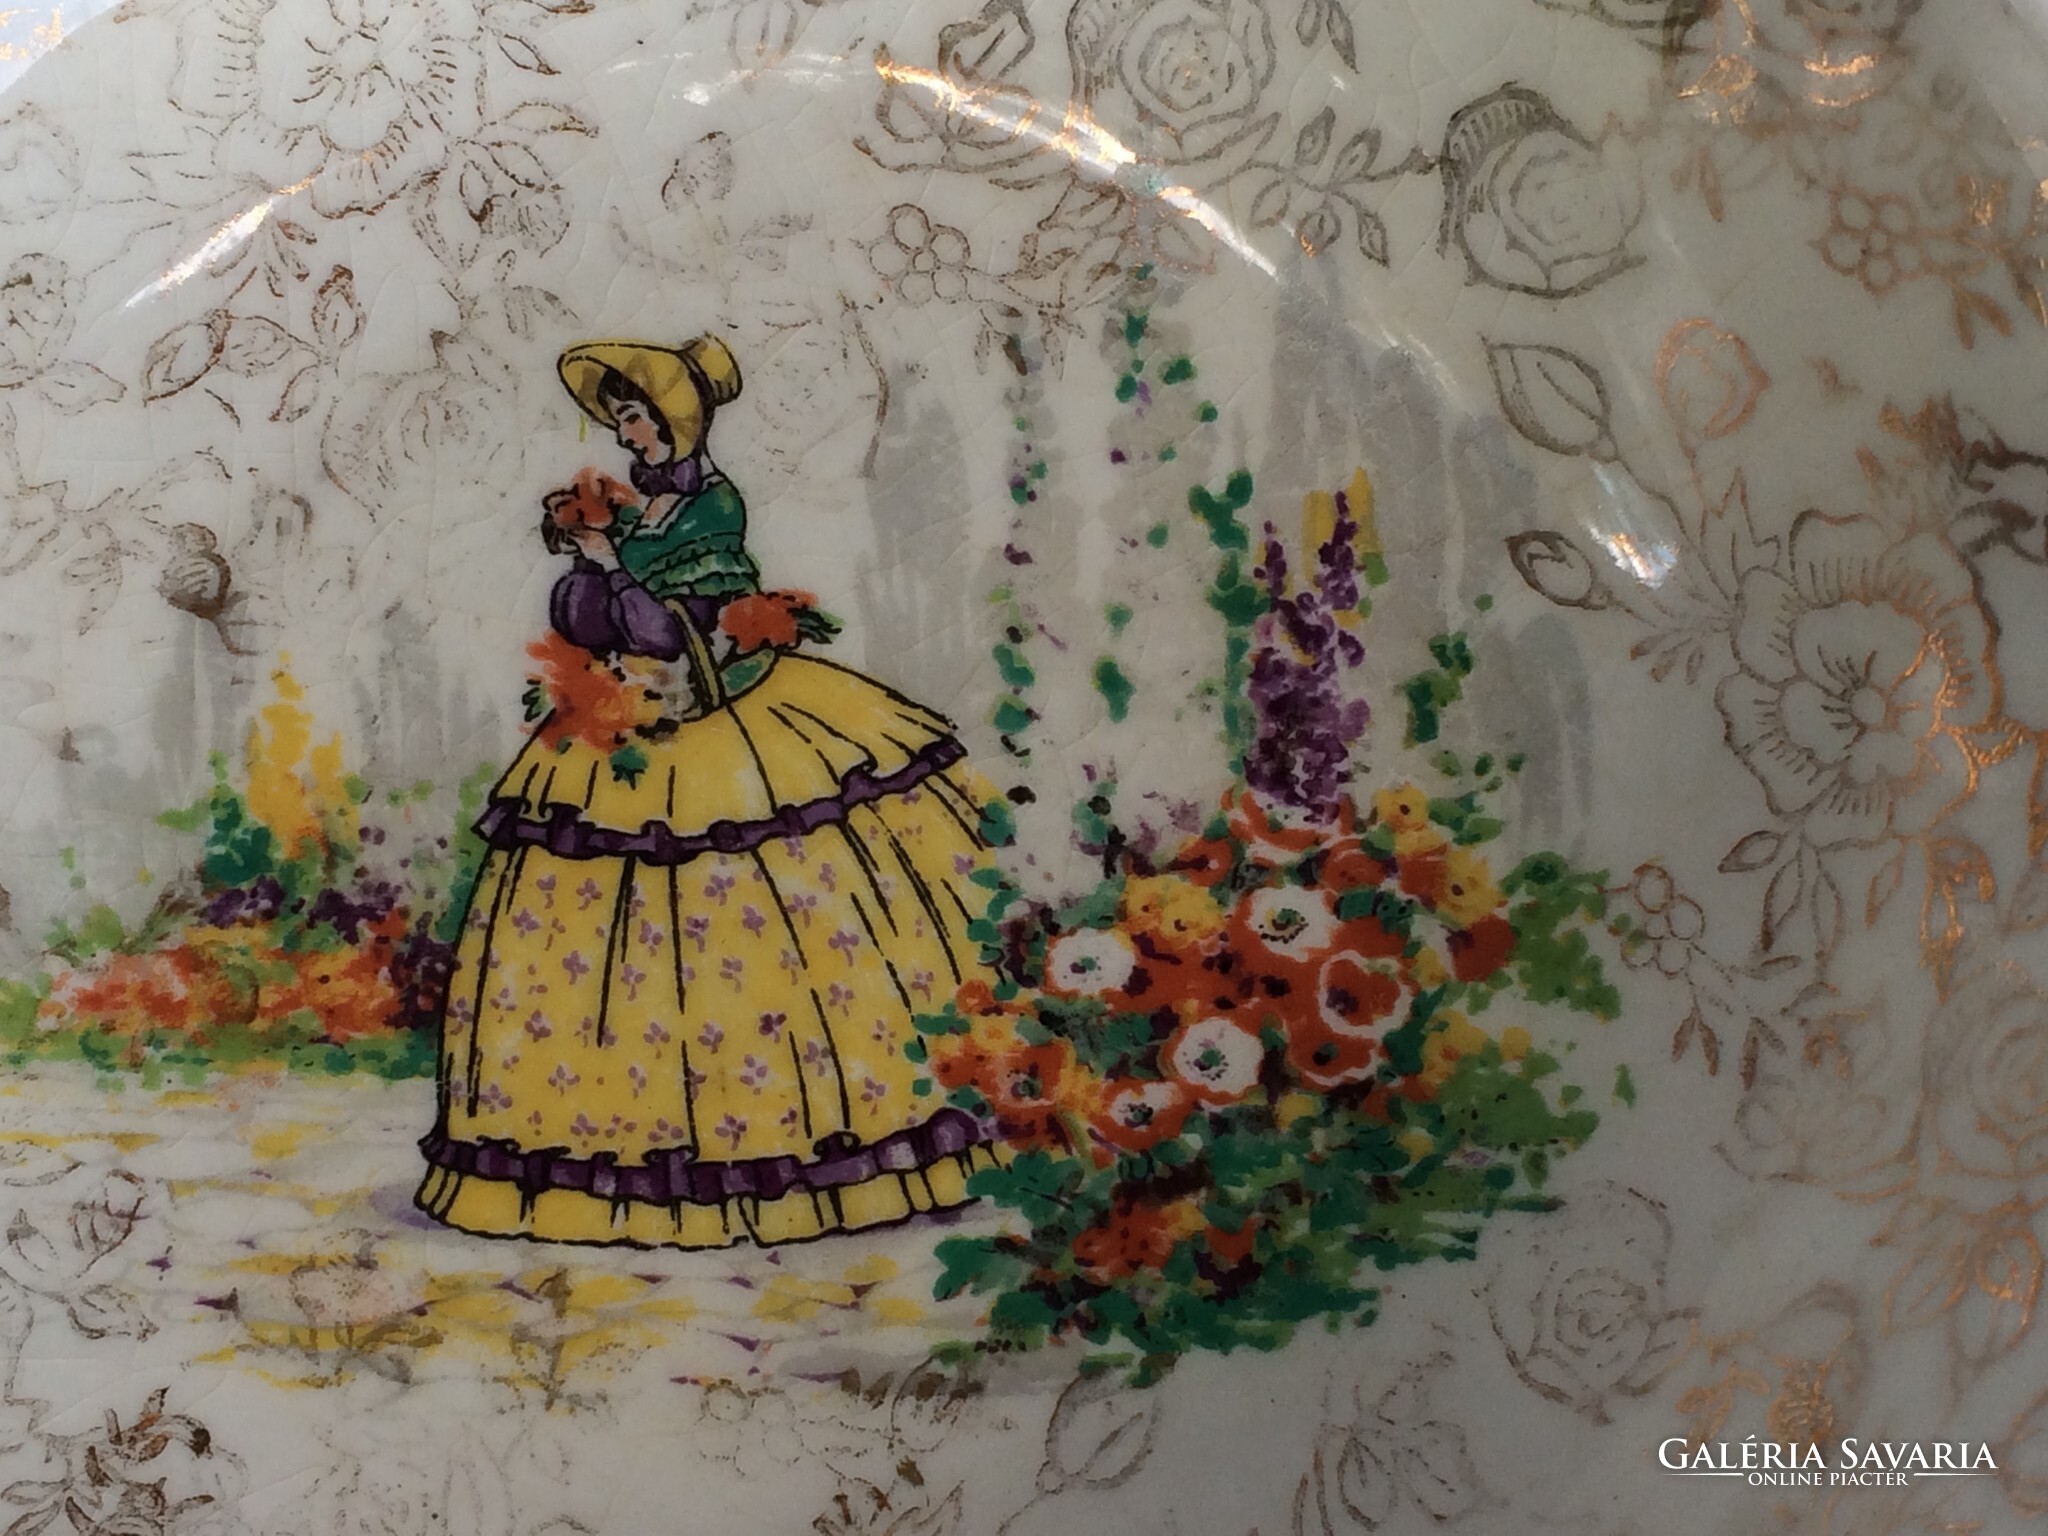 Crinoline lady English offer - Porcelains  Galeria Savaria online  marketplace - Buy or sell on a reliable, quality online platform!